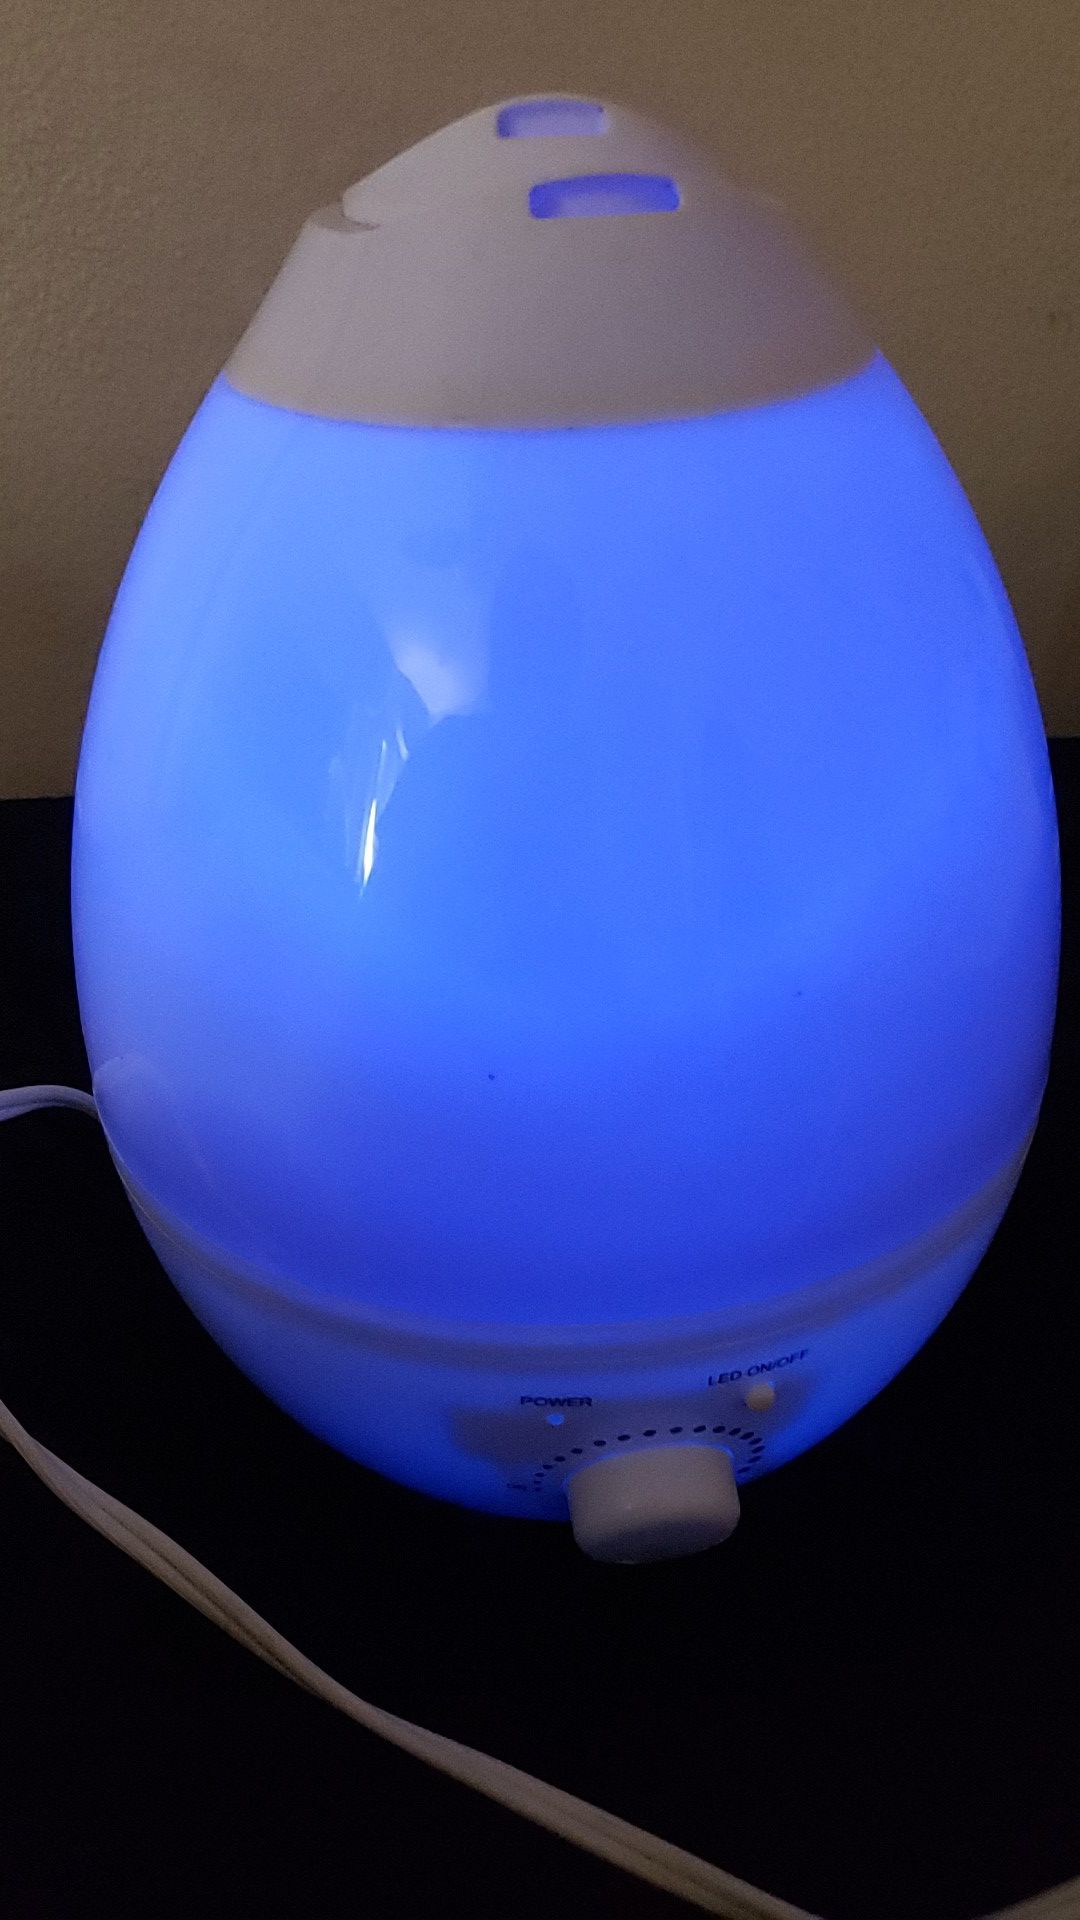 Humidifier with RGB lights